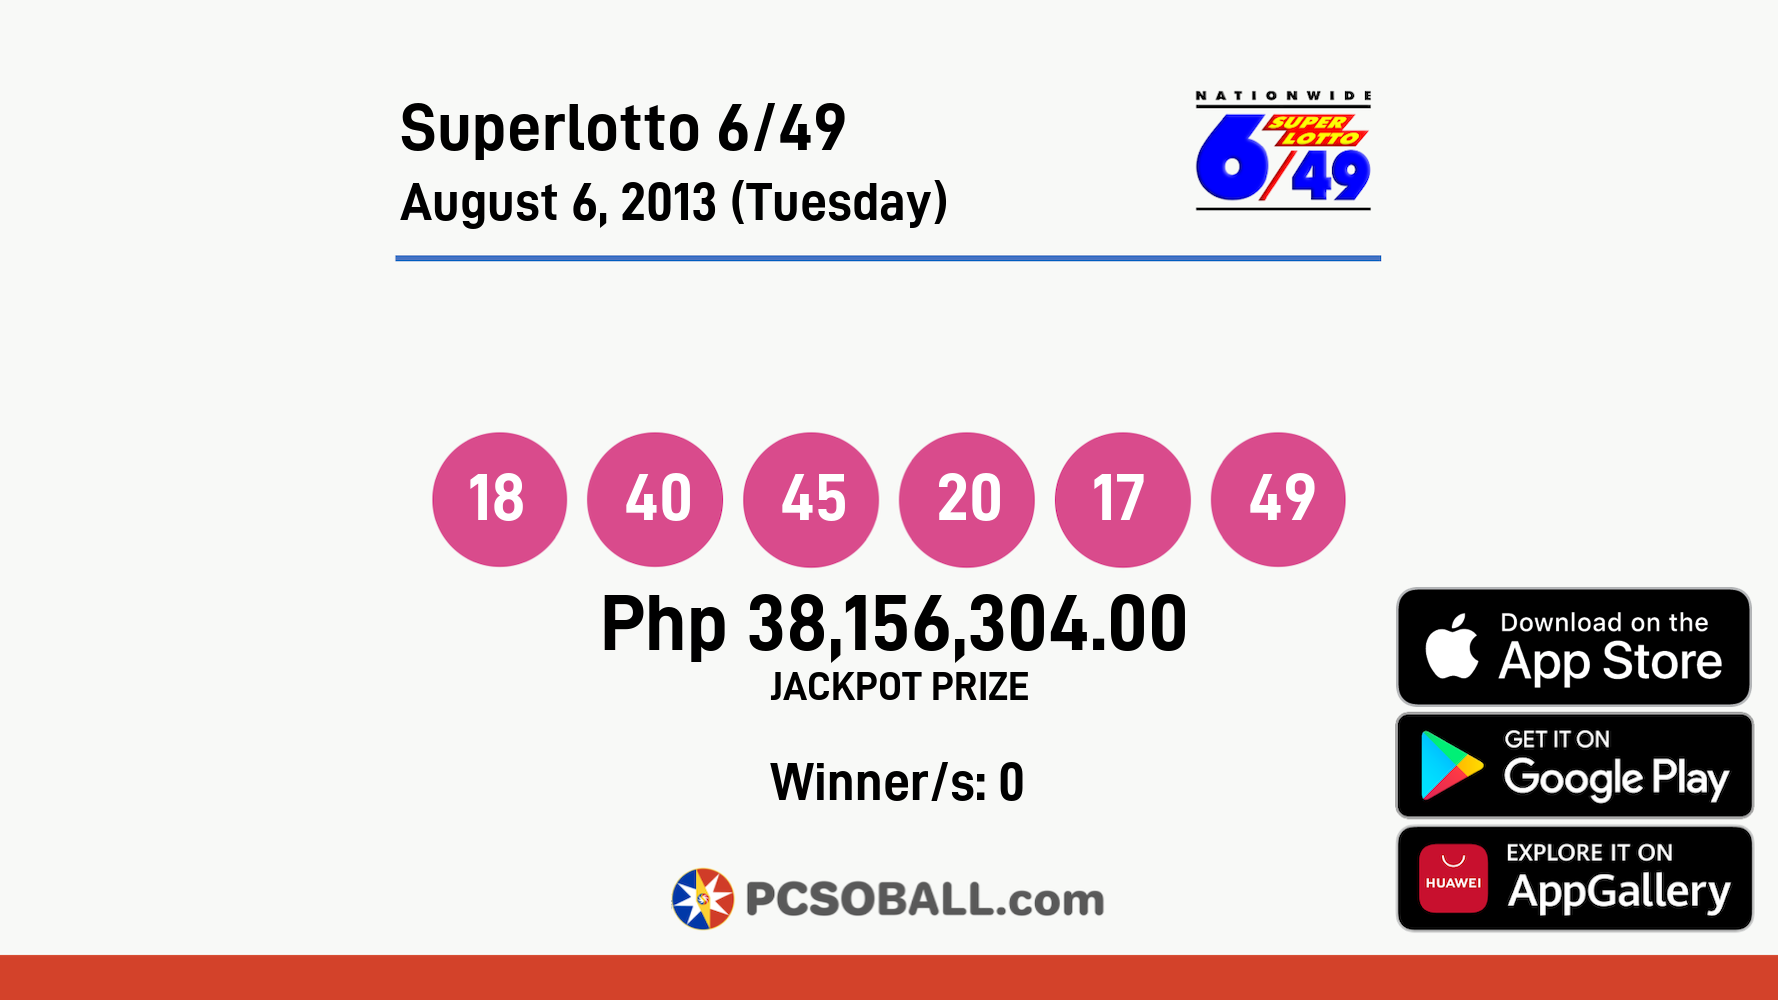 Superlotto 6/49 August 6, 2013 (Tuesday) Result